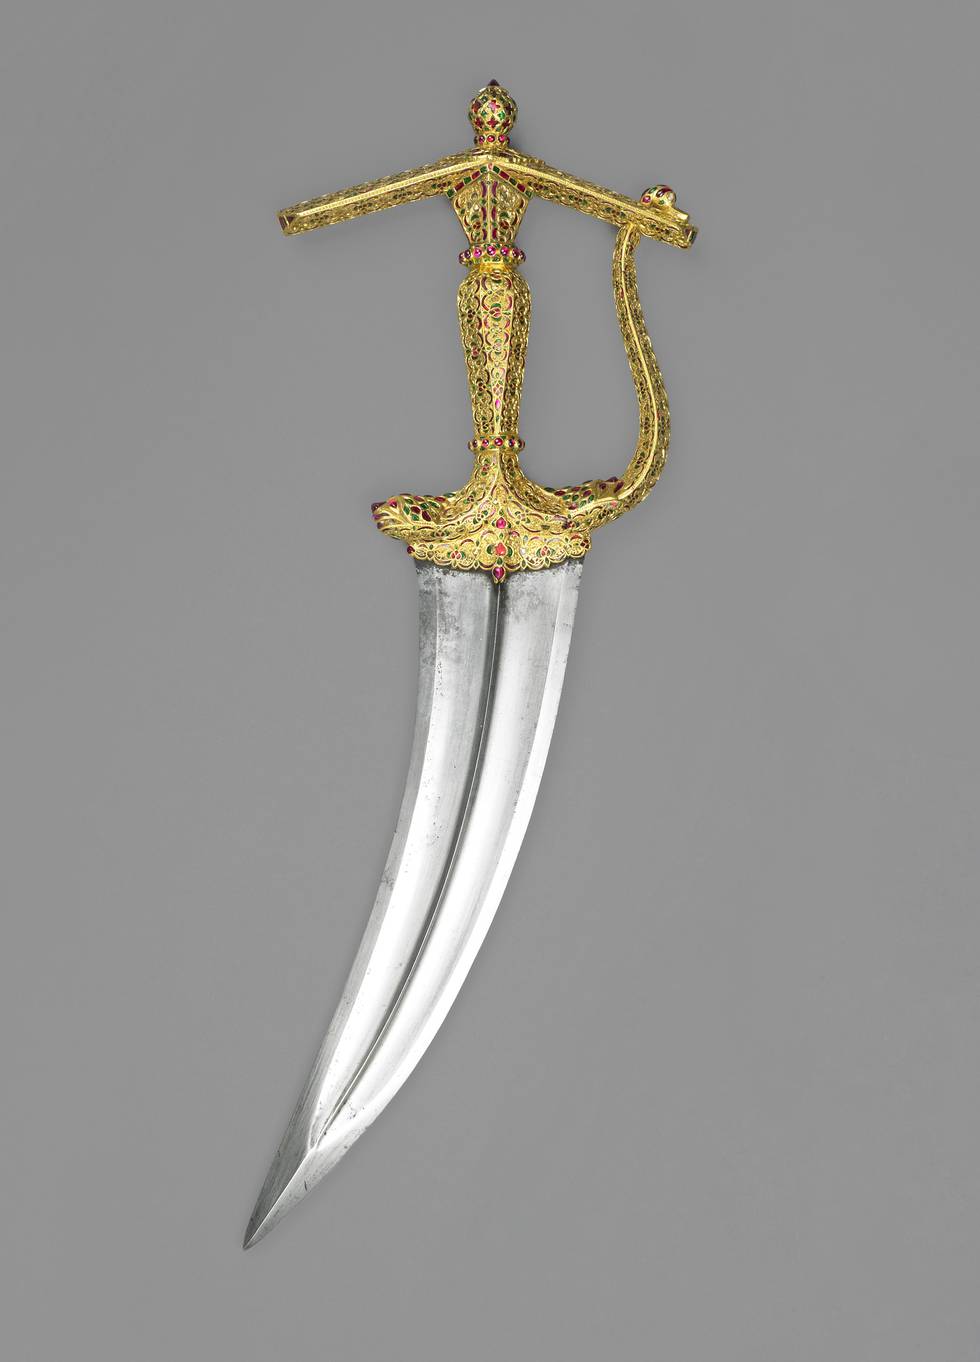 Tiger head shaped gold, jewelled dagger handle